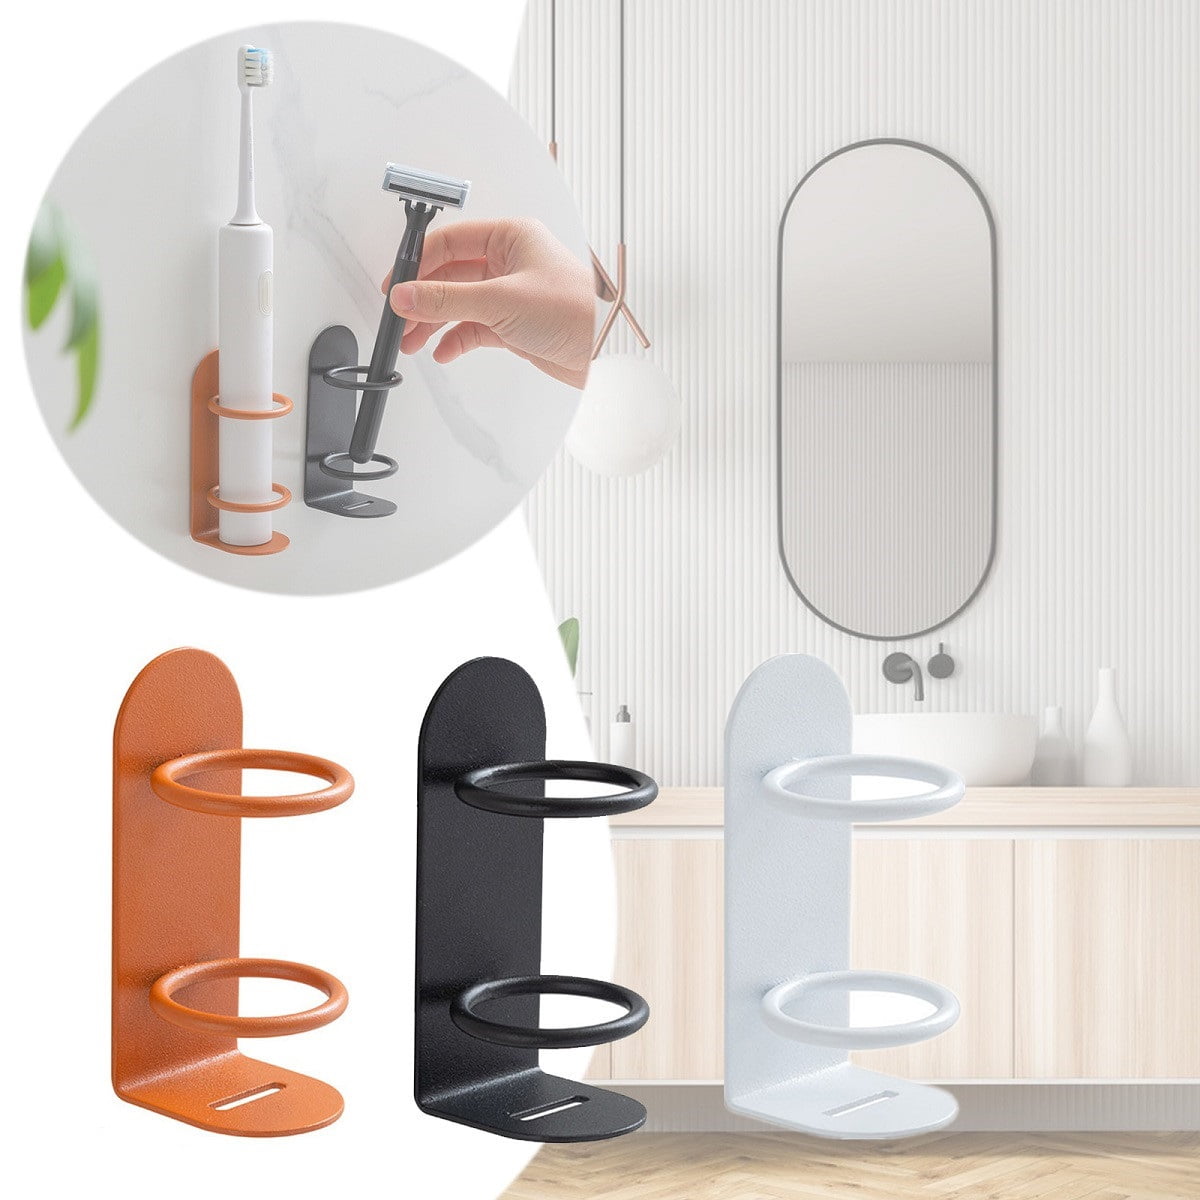 Electric Toothbrush Holder Wall Suction for Bathroom Adhesive Stainless Steel 